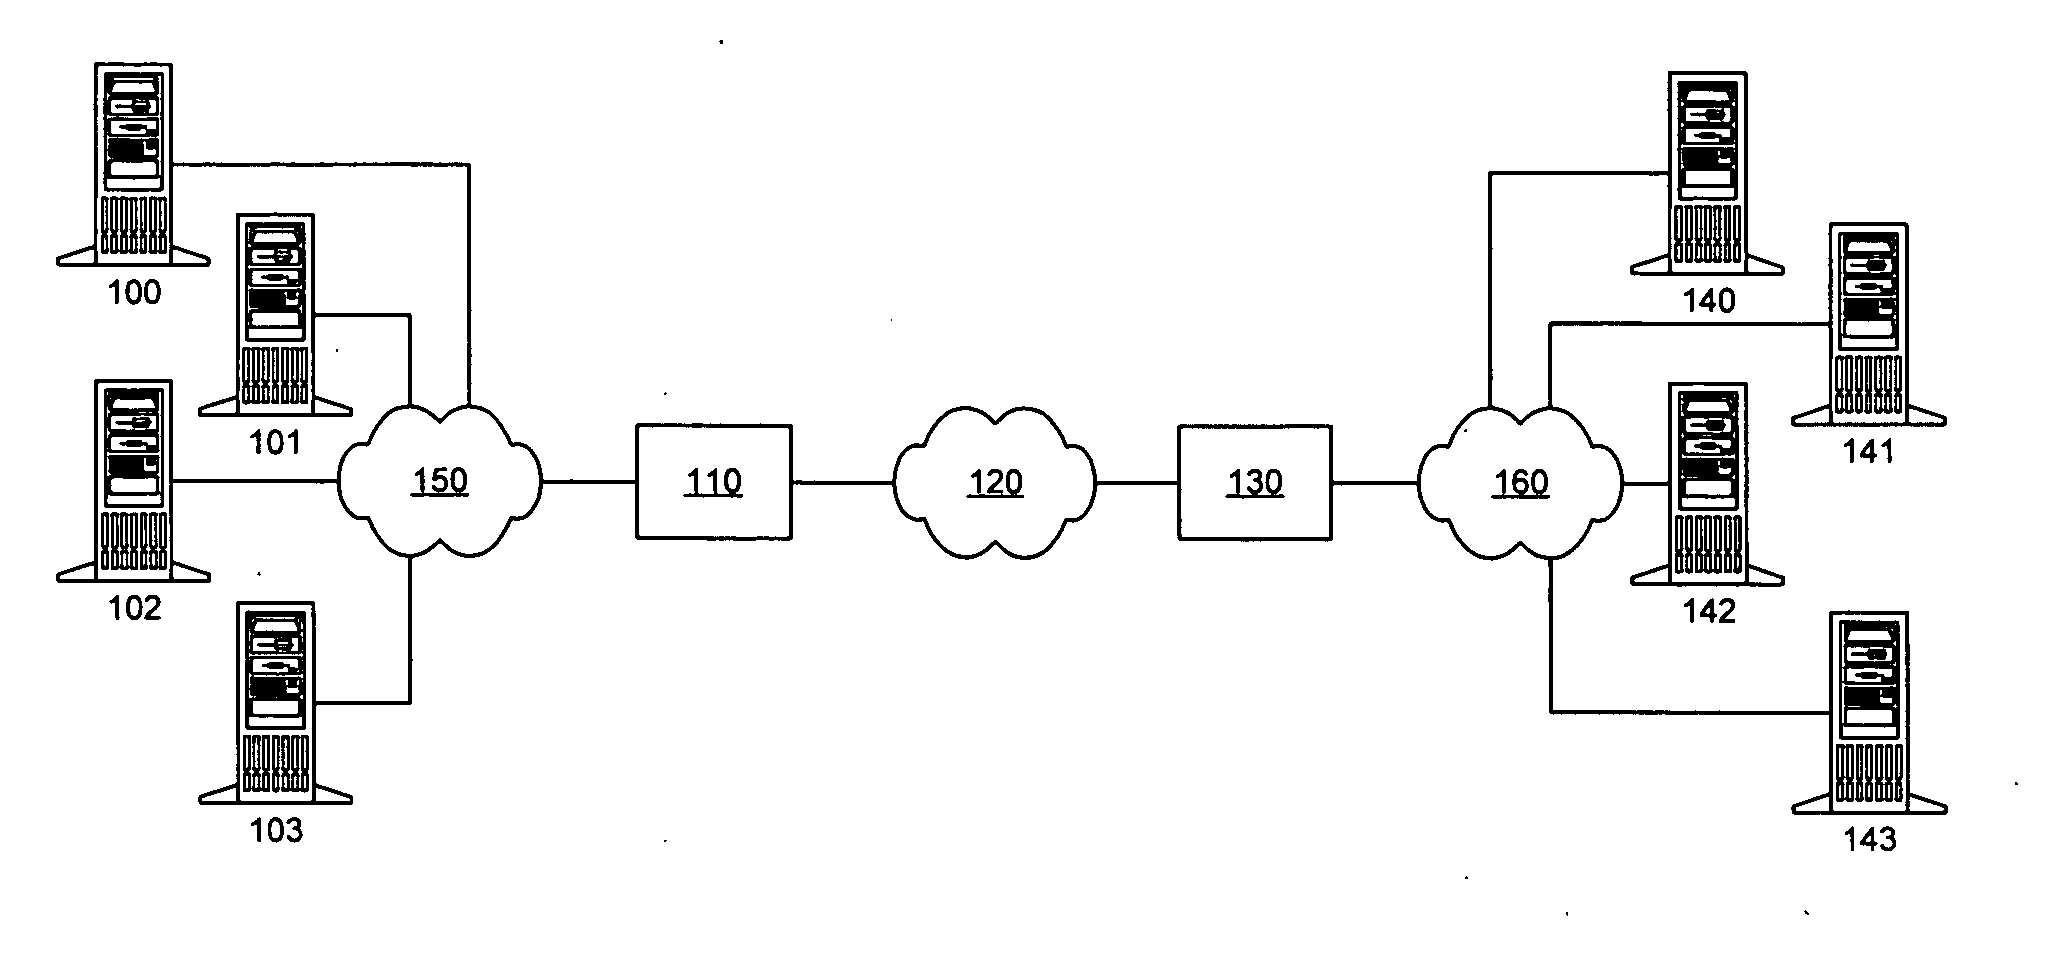 Automatic detection and window virtualization for flow control